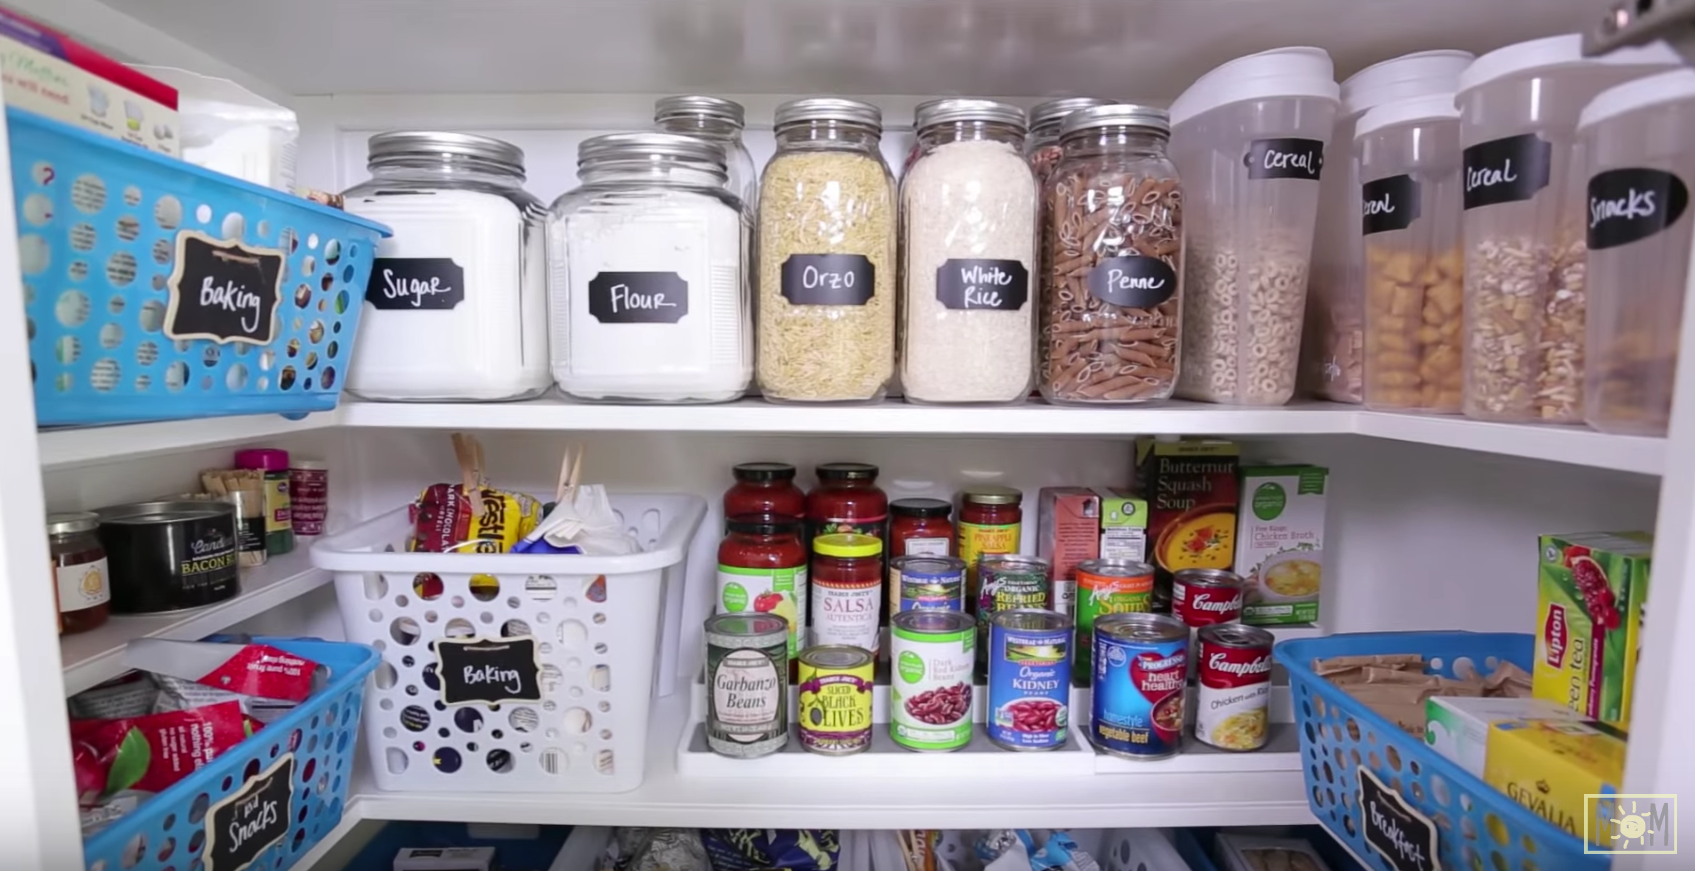 Tired of having to keep on reorganizing your pantry? With these helpful tips, you'll be able to organize pantry items more efficiently and keep it that way.